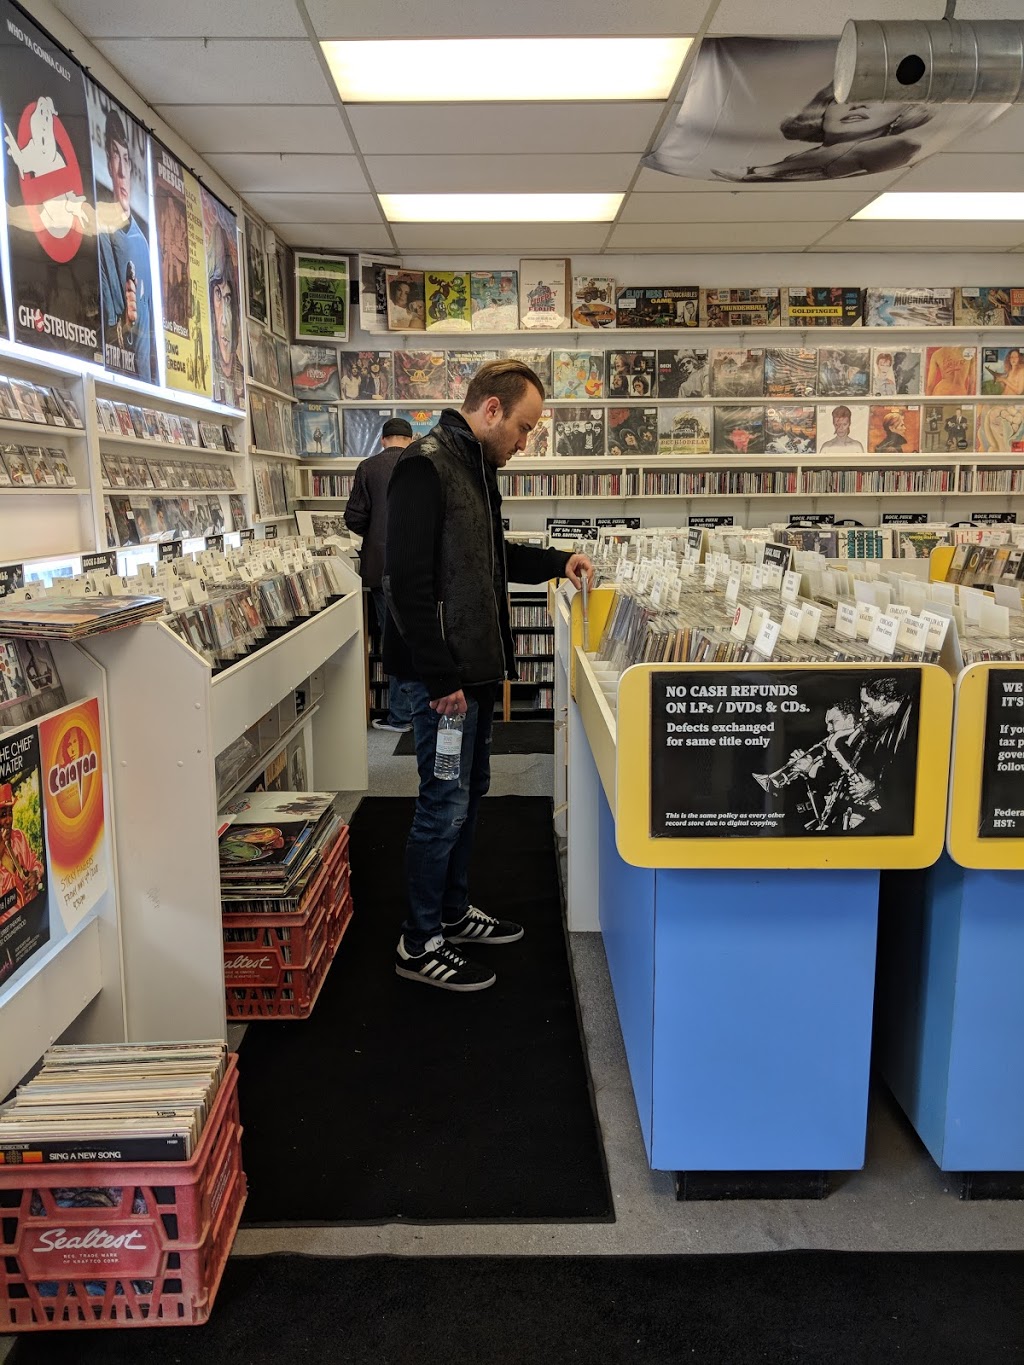 BJ Records & Nostalgia | electronics store | 13 Clapperton St, Barrie, ON L4M 3E4, Canada | 7057373031 OR +1 705-737-3031